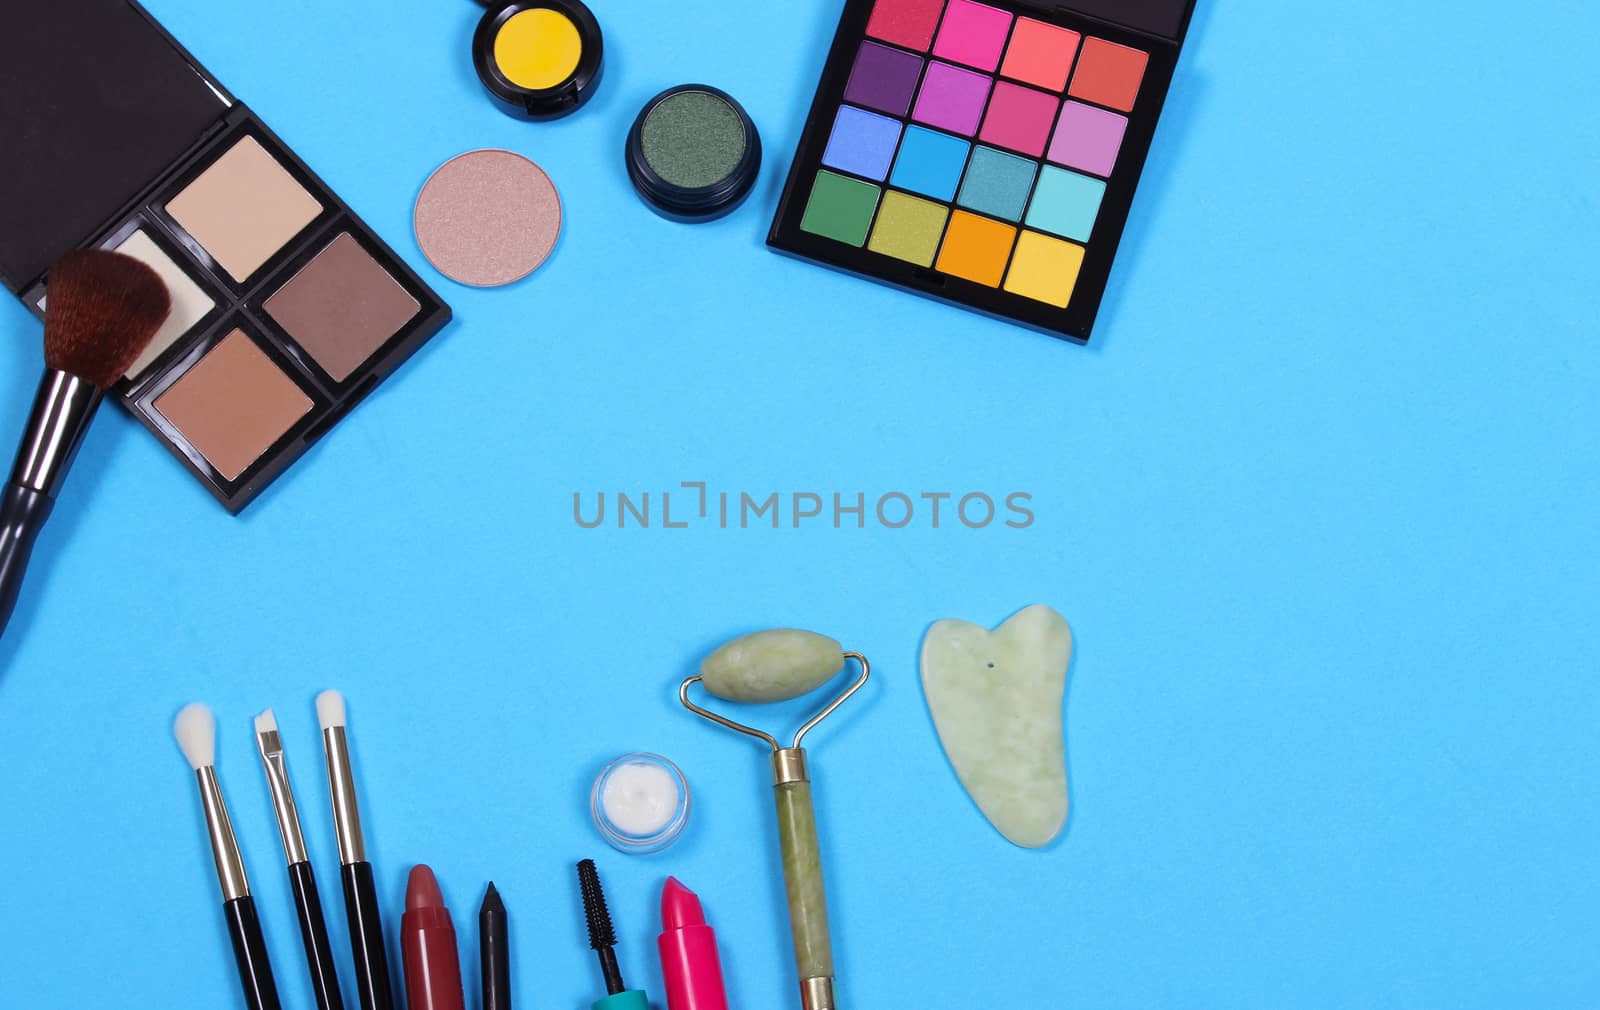 Cosmetics and Brushes on textured blue paper background